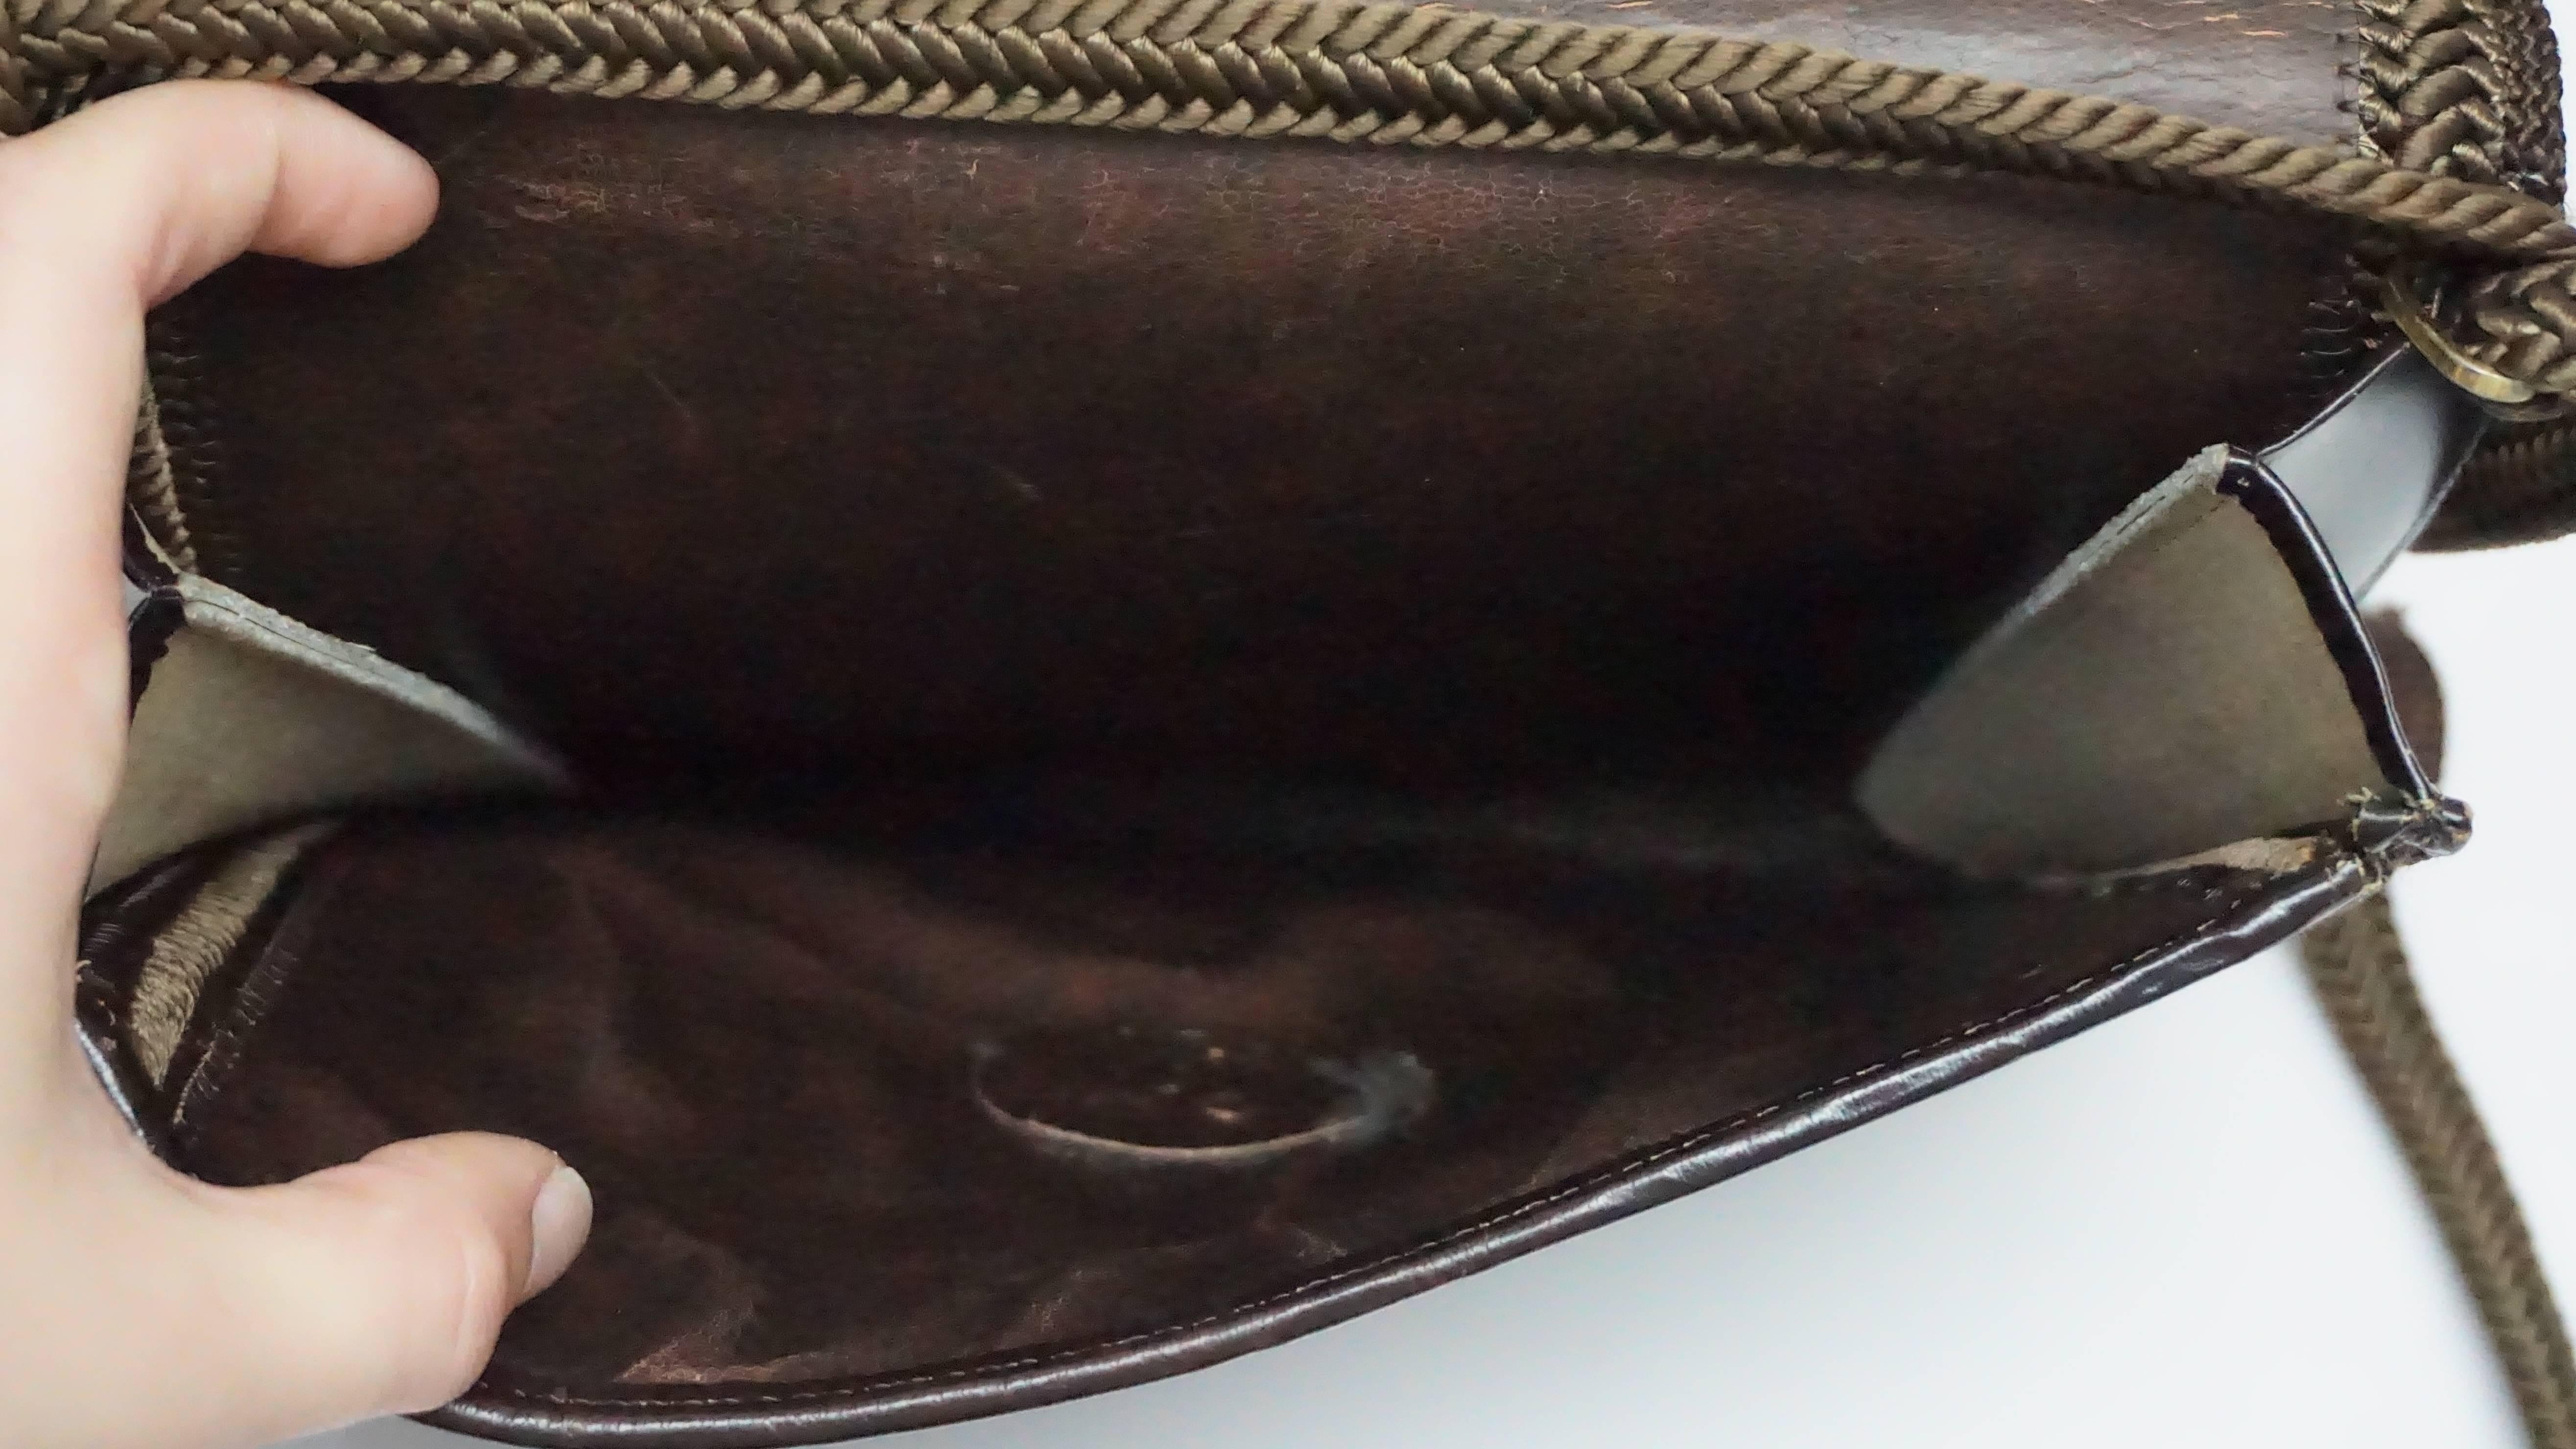 Emanuel Ungaro Chocolate Brown Pony Hair Crossbody  This beautiful vintage Ungaro bag is in excellent condition. The bag is completely covered in chocolate brown pony hair and is trimmed with a silk braided detail. The strap is also in the same silk